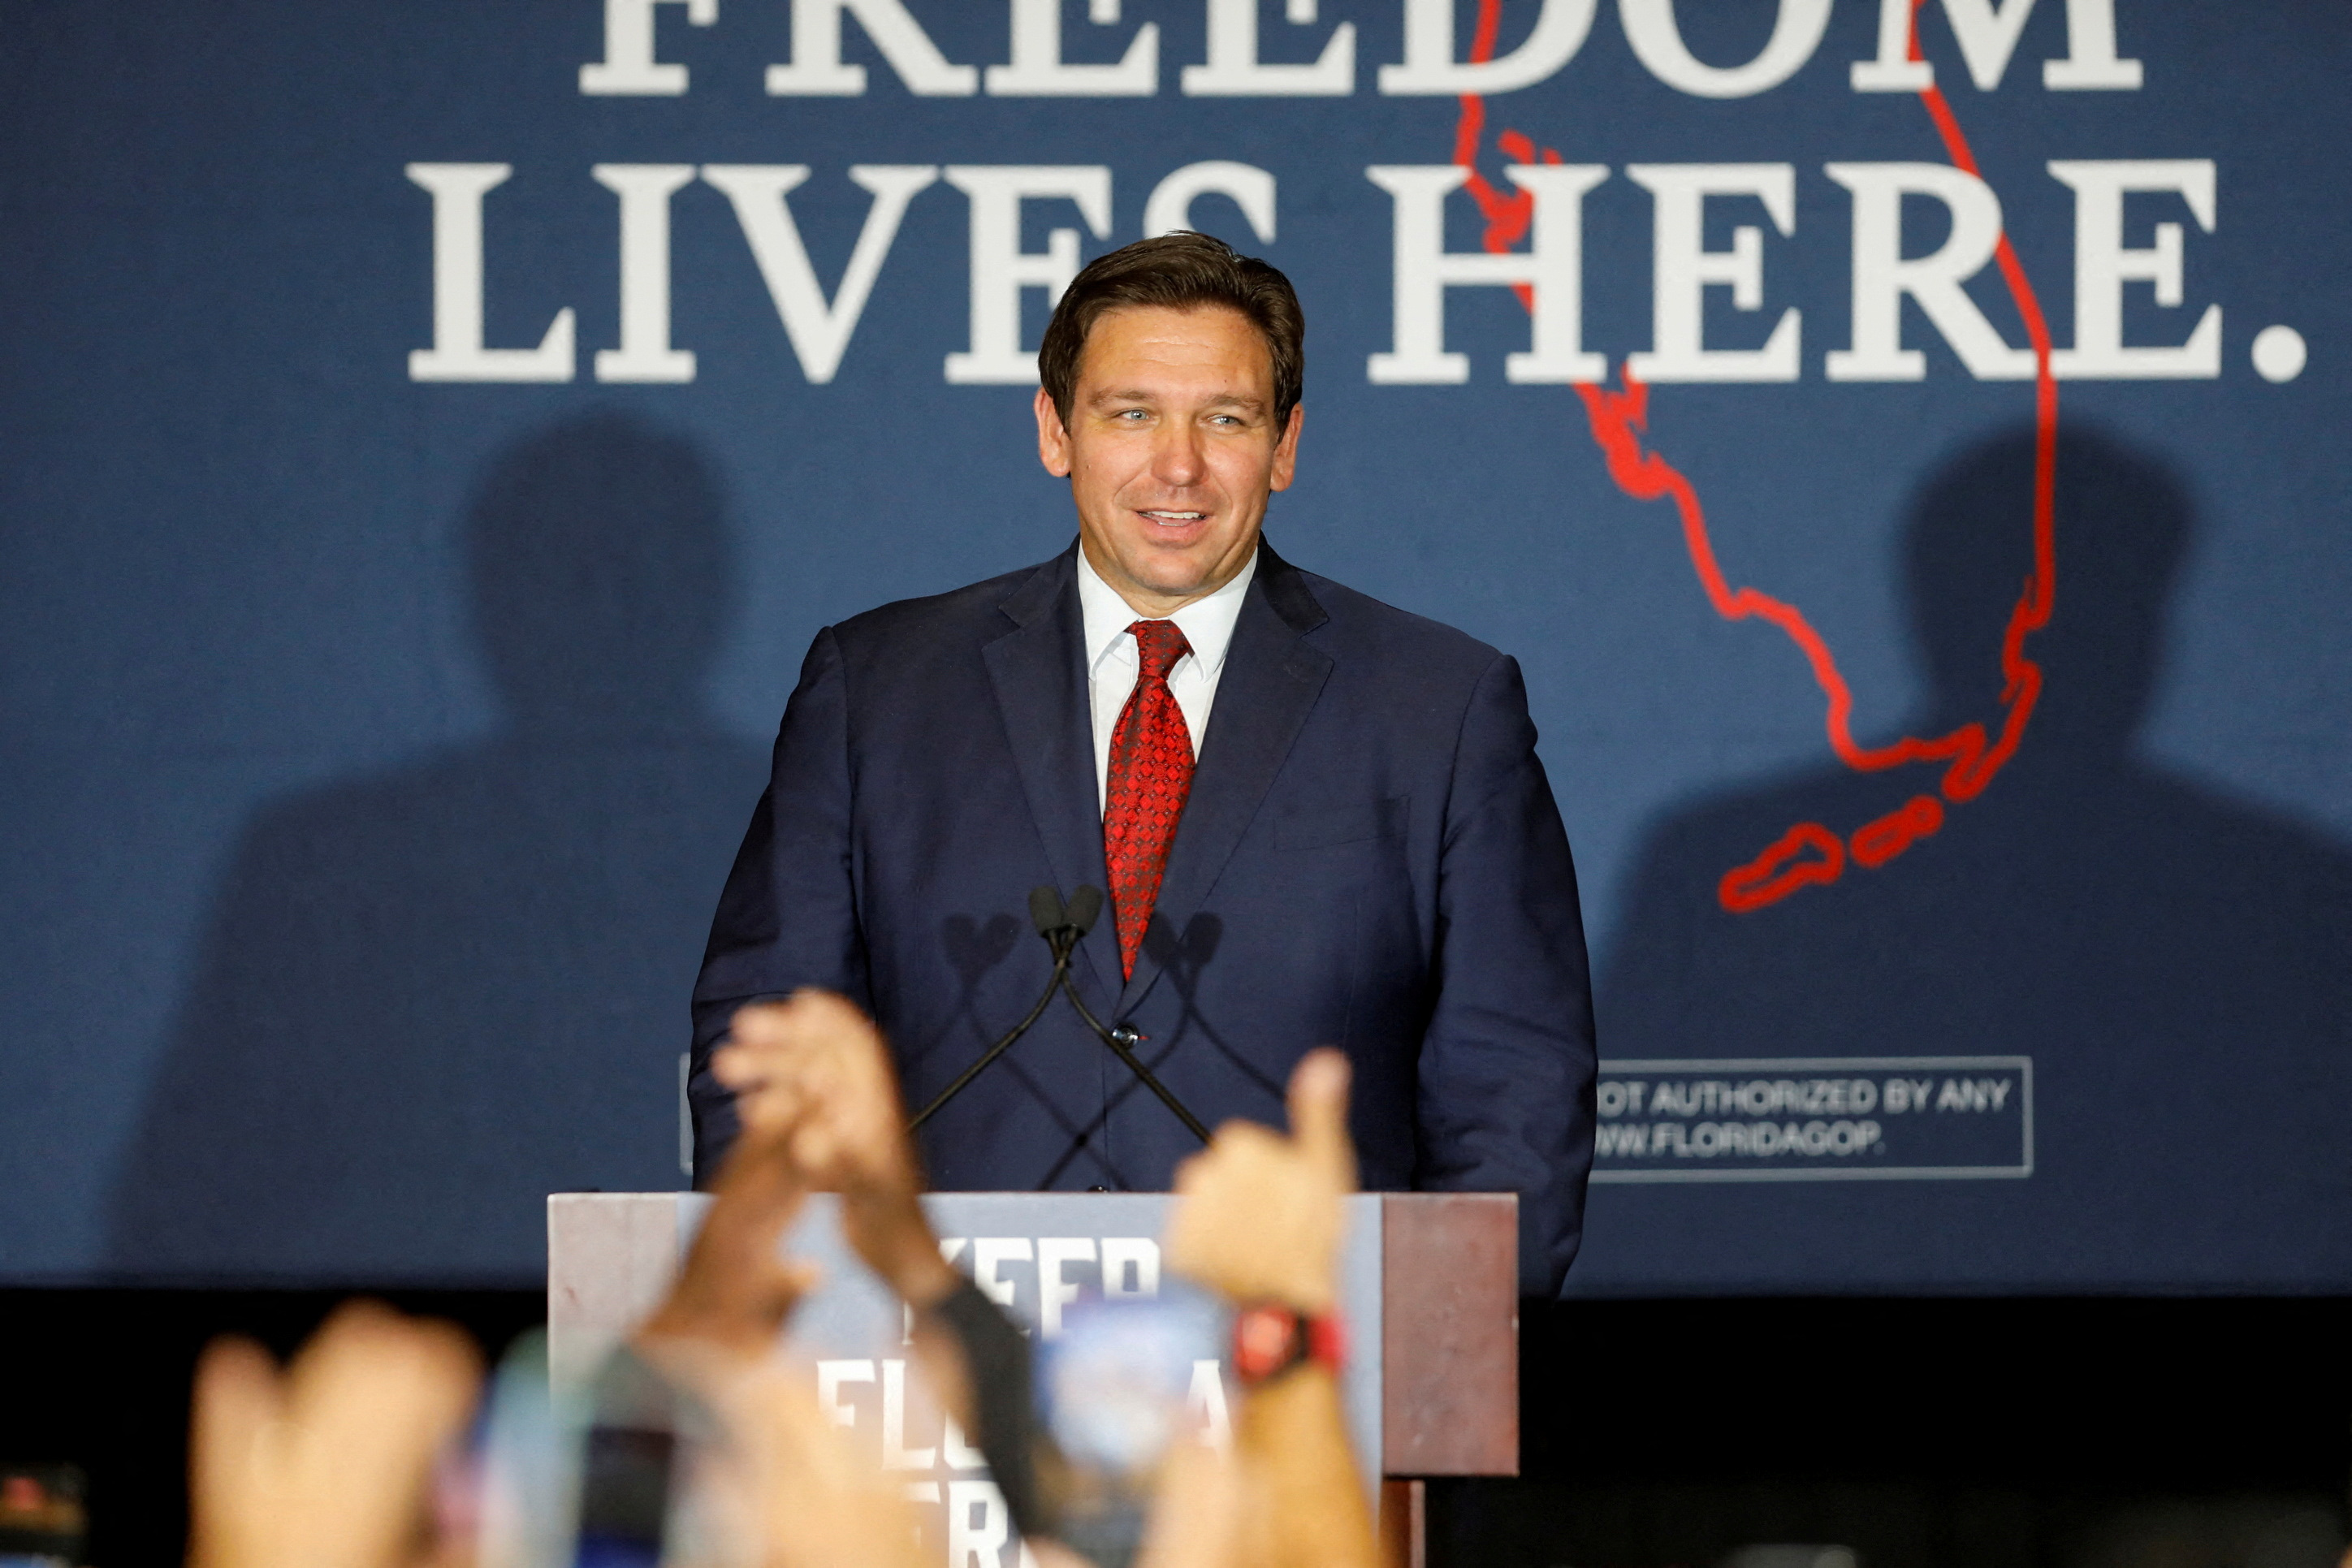 Florida Governor Ron DeSantis, who aspires to challenge Donald Trump as the Republican Party's presidential candidate for the next election.  (REUTERS/Octavio Jones)